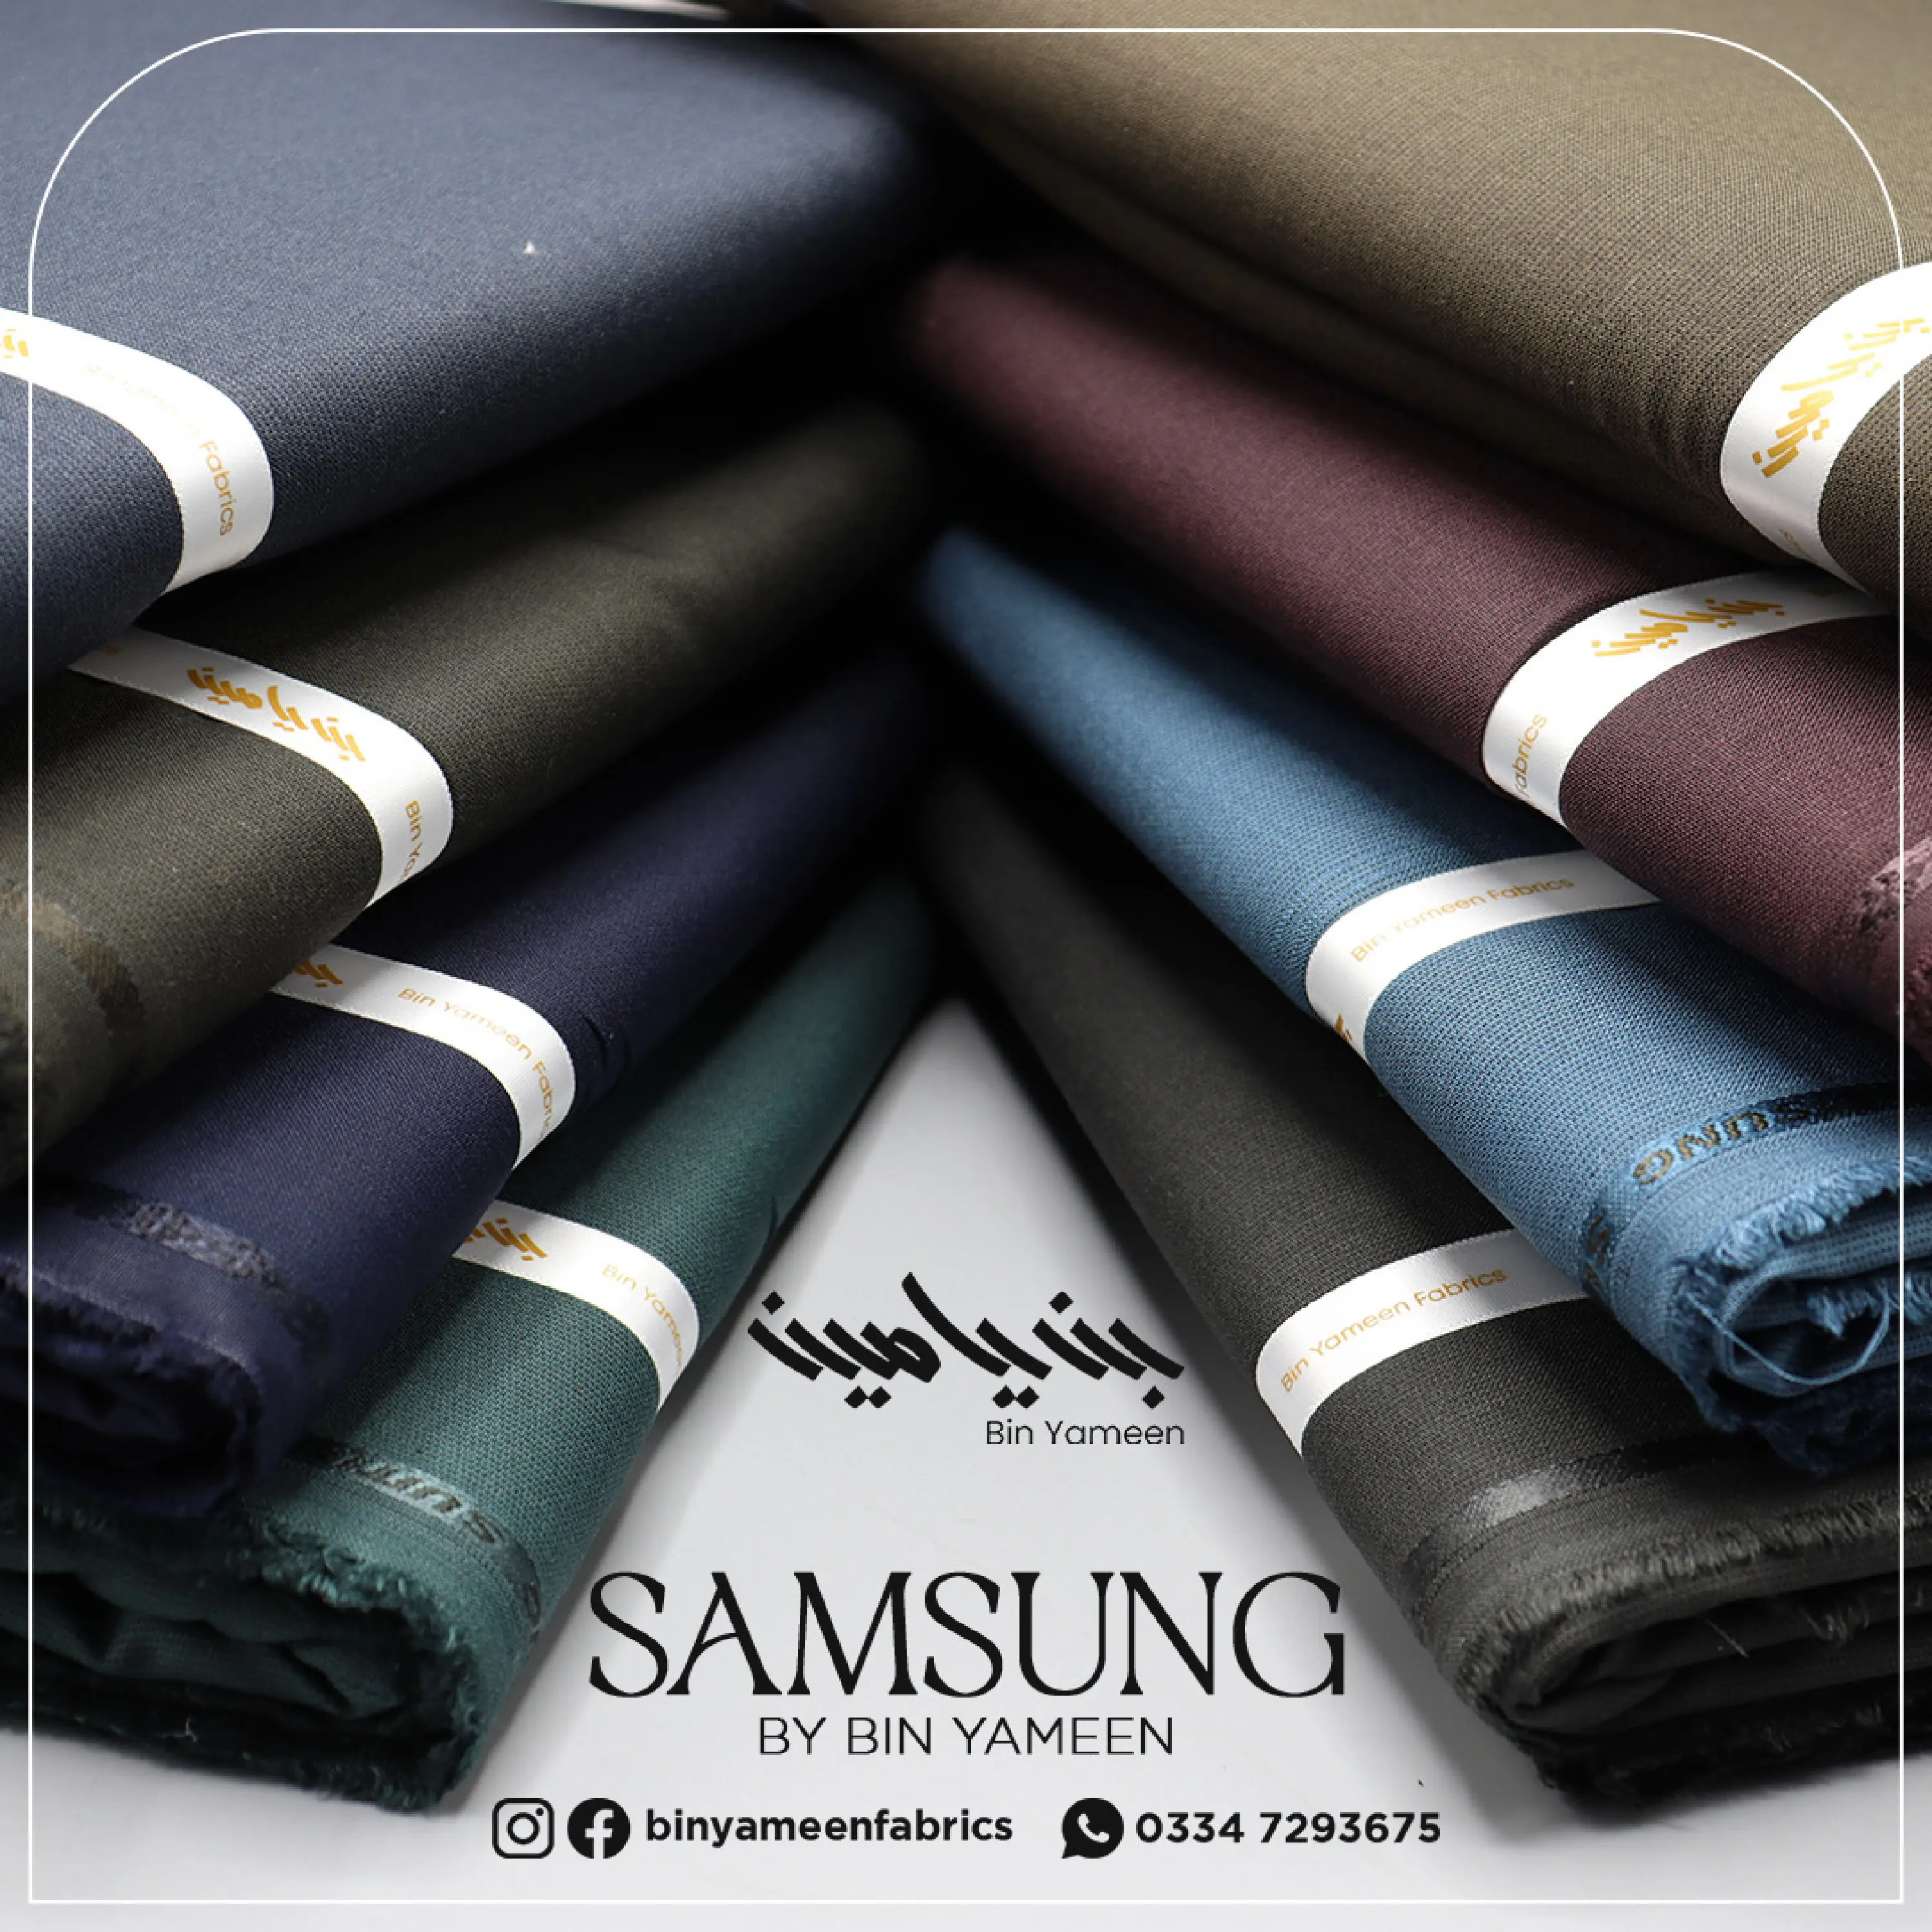 Samsung By Bin Yameen Collection - SBBYC